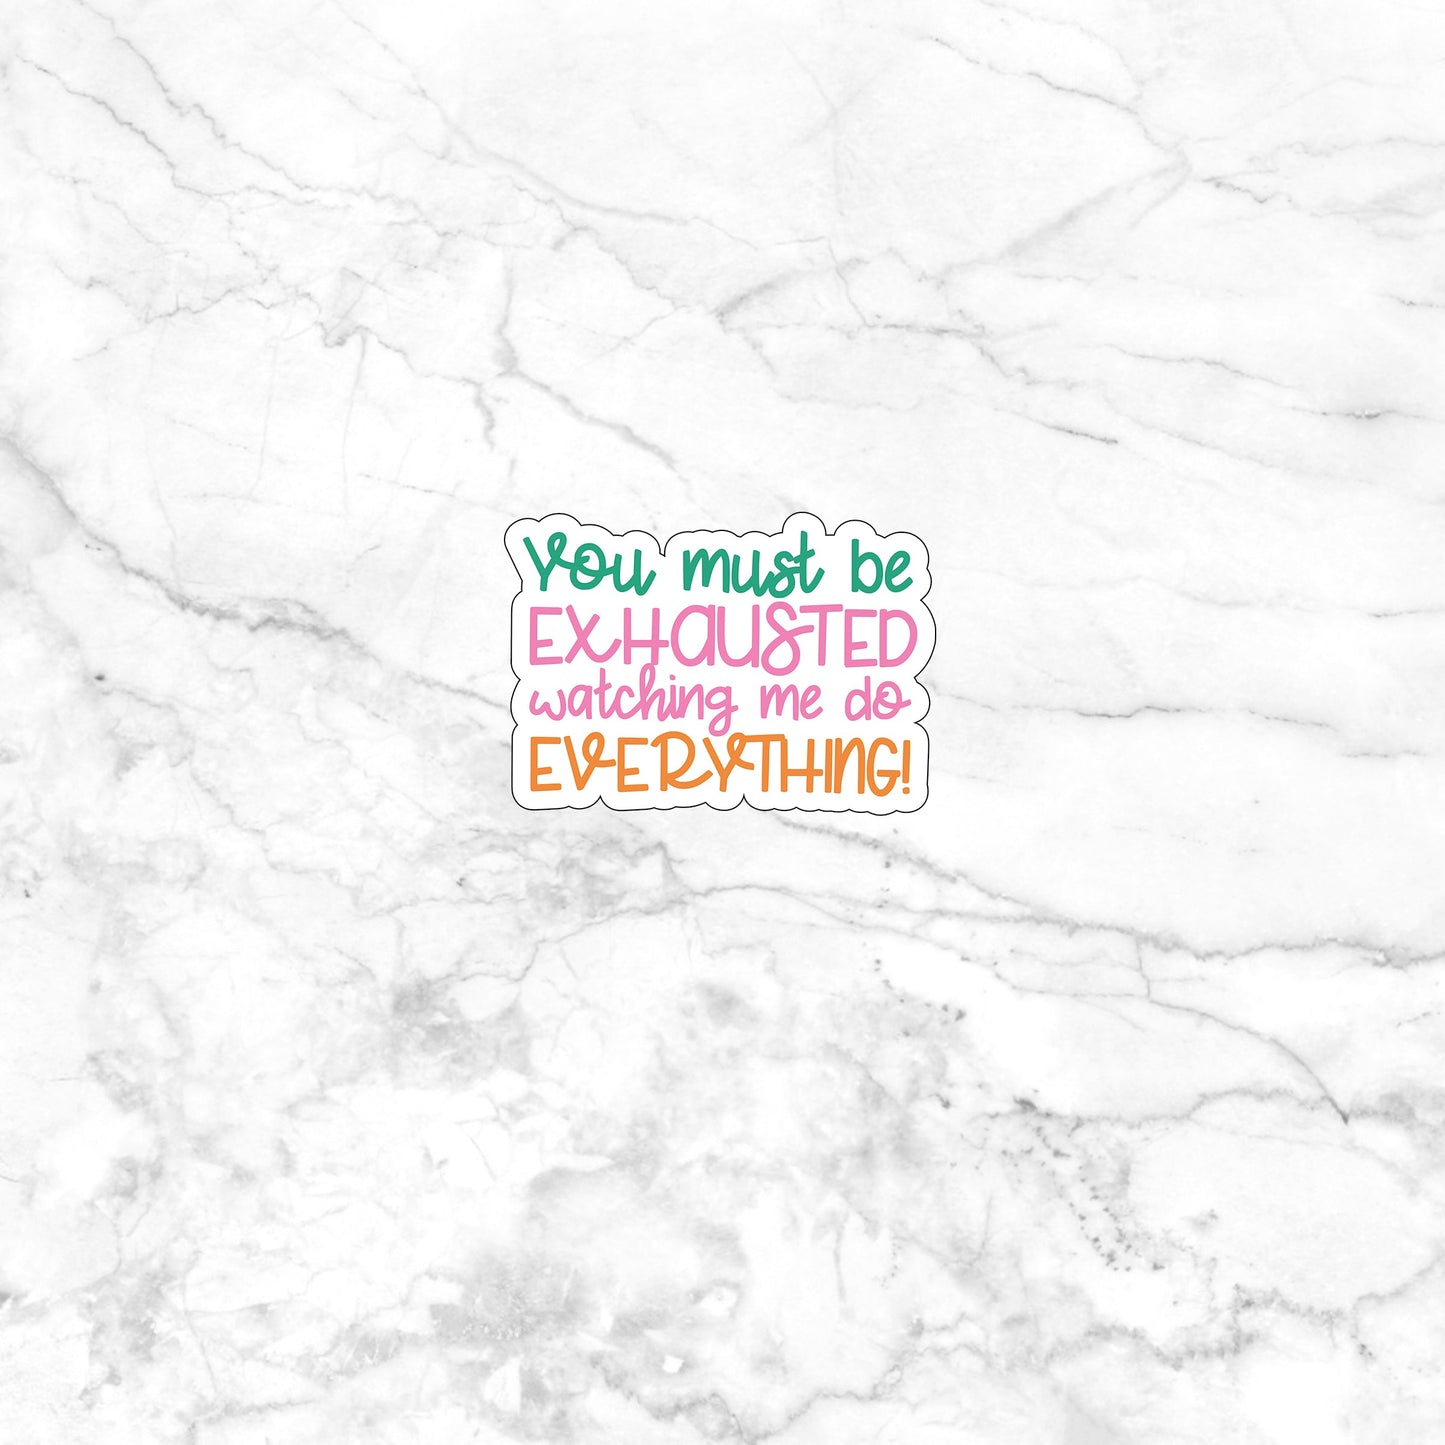 You must be exhausted watching me do everything  Sticker,  Vinyl sticker, laptop sticker, Tablet sticker